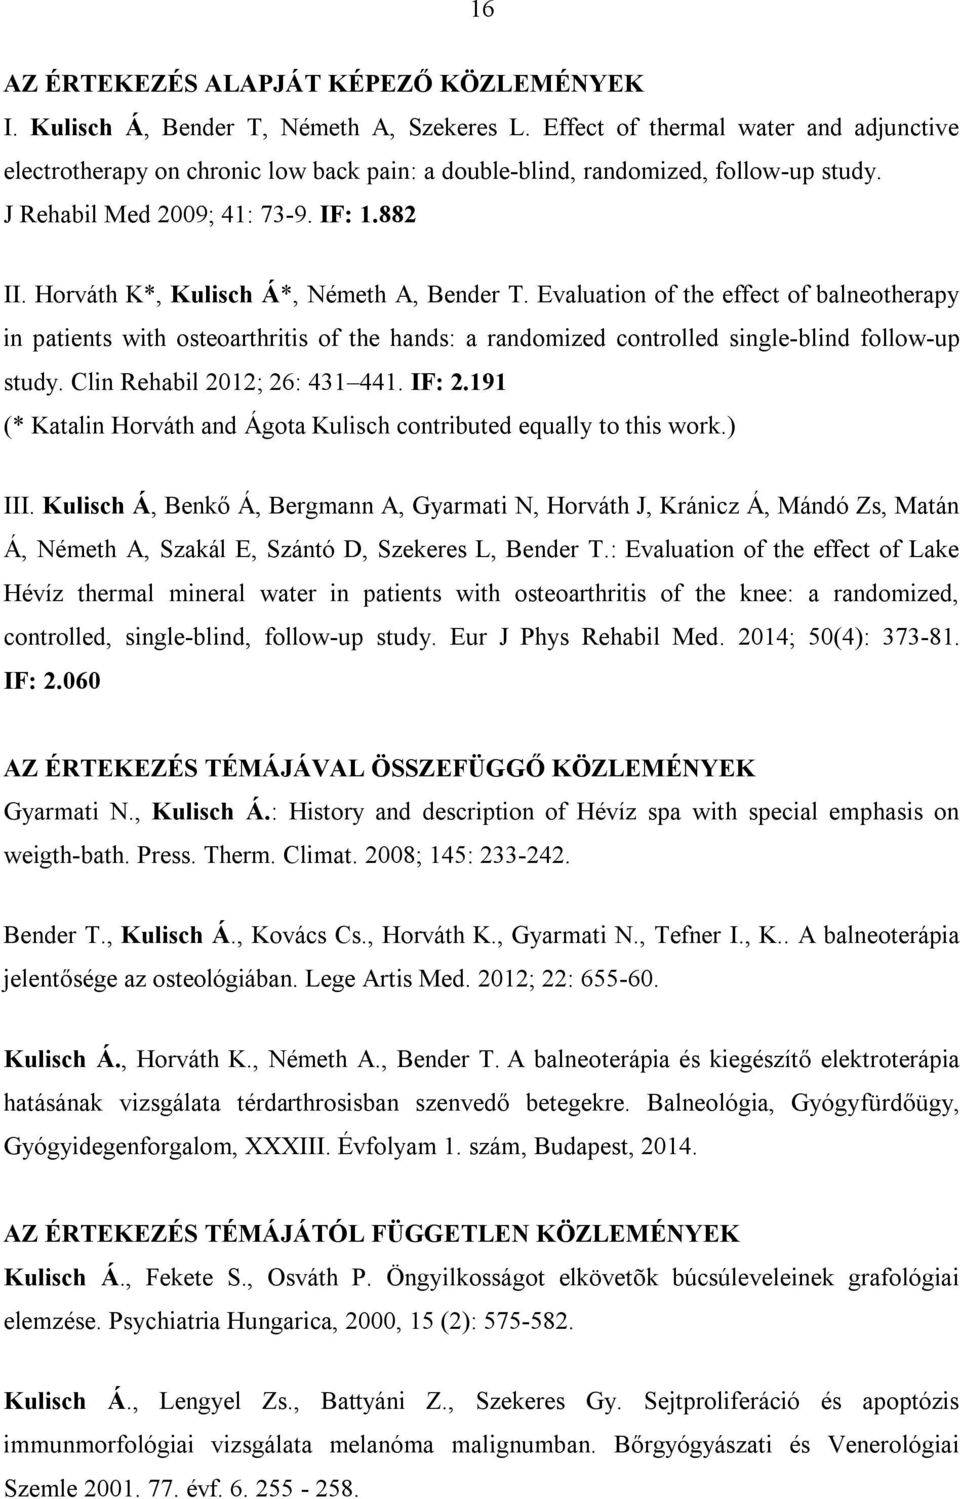 Horváth K*, Kulisch Á*, Németh A, Bender T. Evaluation of the effect of balneotherapy in patients with osteoarthritis of the hands: a randomized controlled single-blind follow-up study.